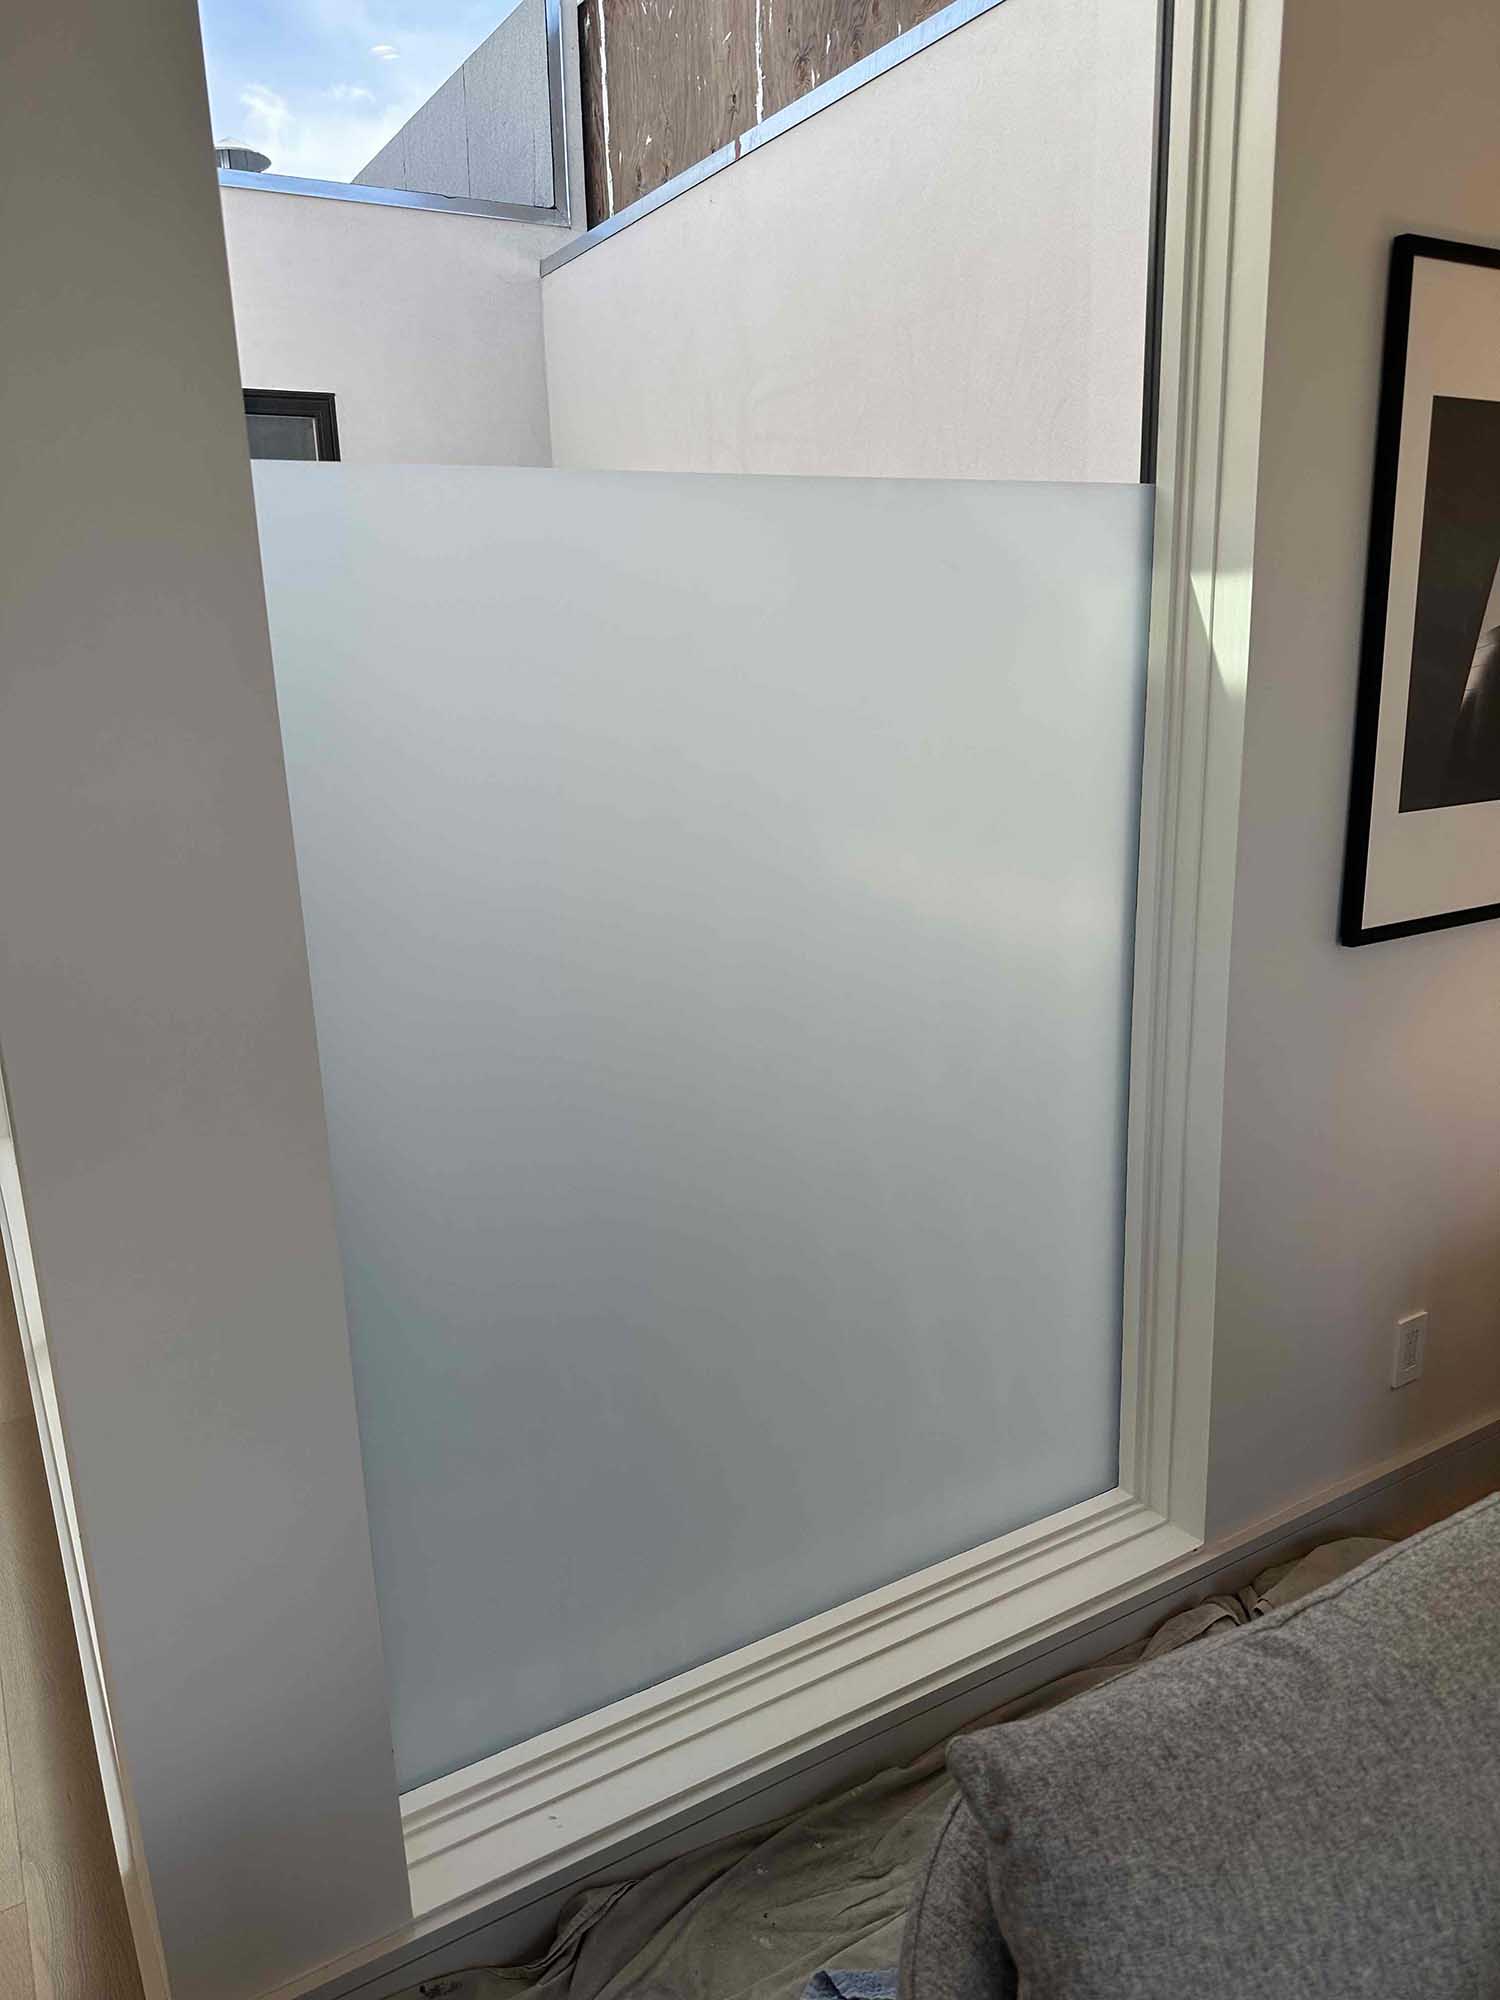 ClimatePro Installs 3M Privacy Window Film for San Francisco Homes